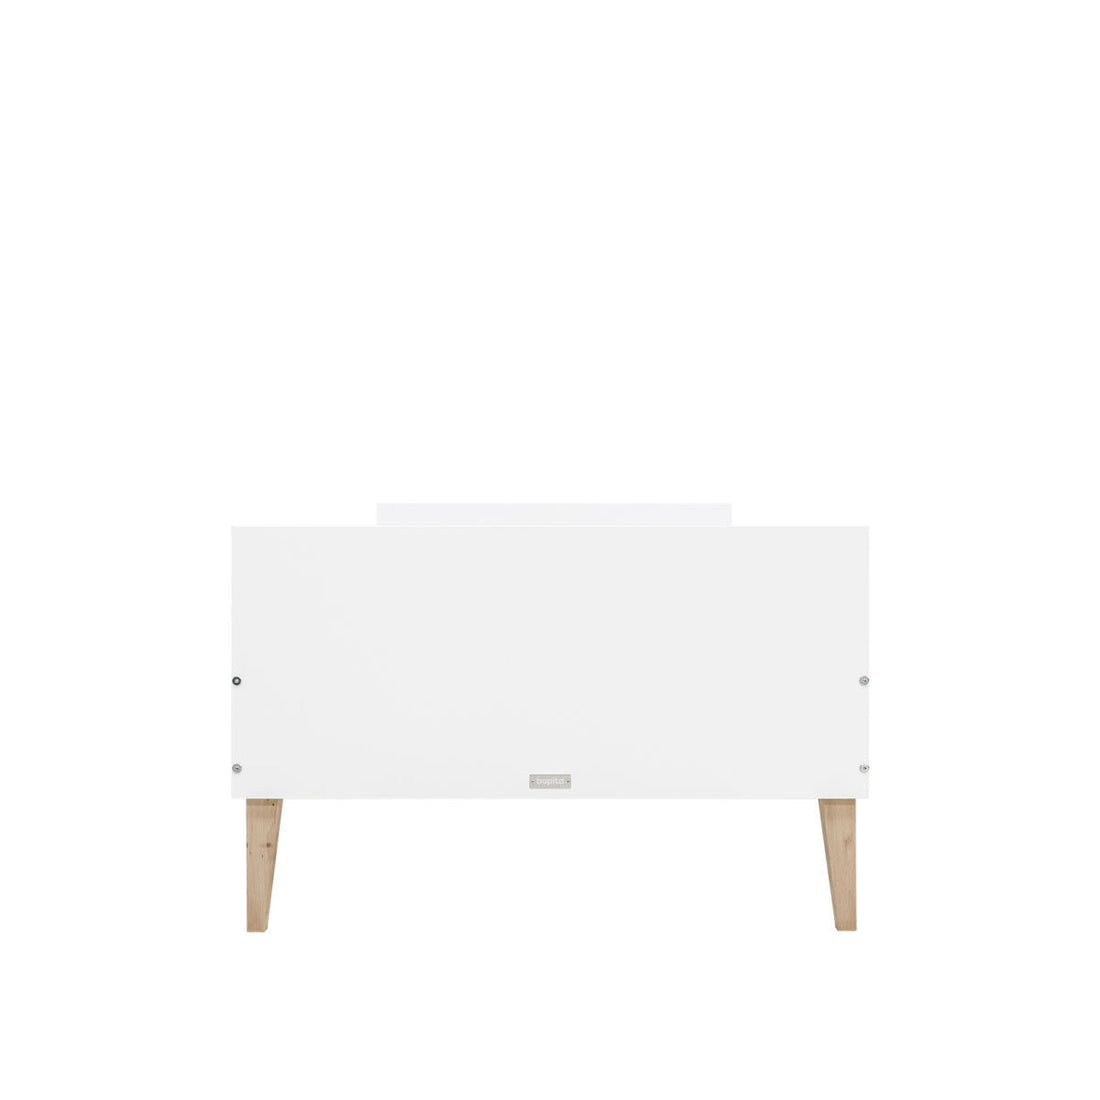 bopita-bed-indy-90x200cm-white-natural-excl-bottom-bopt-15419503- (4)